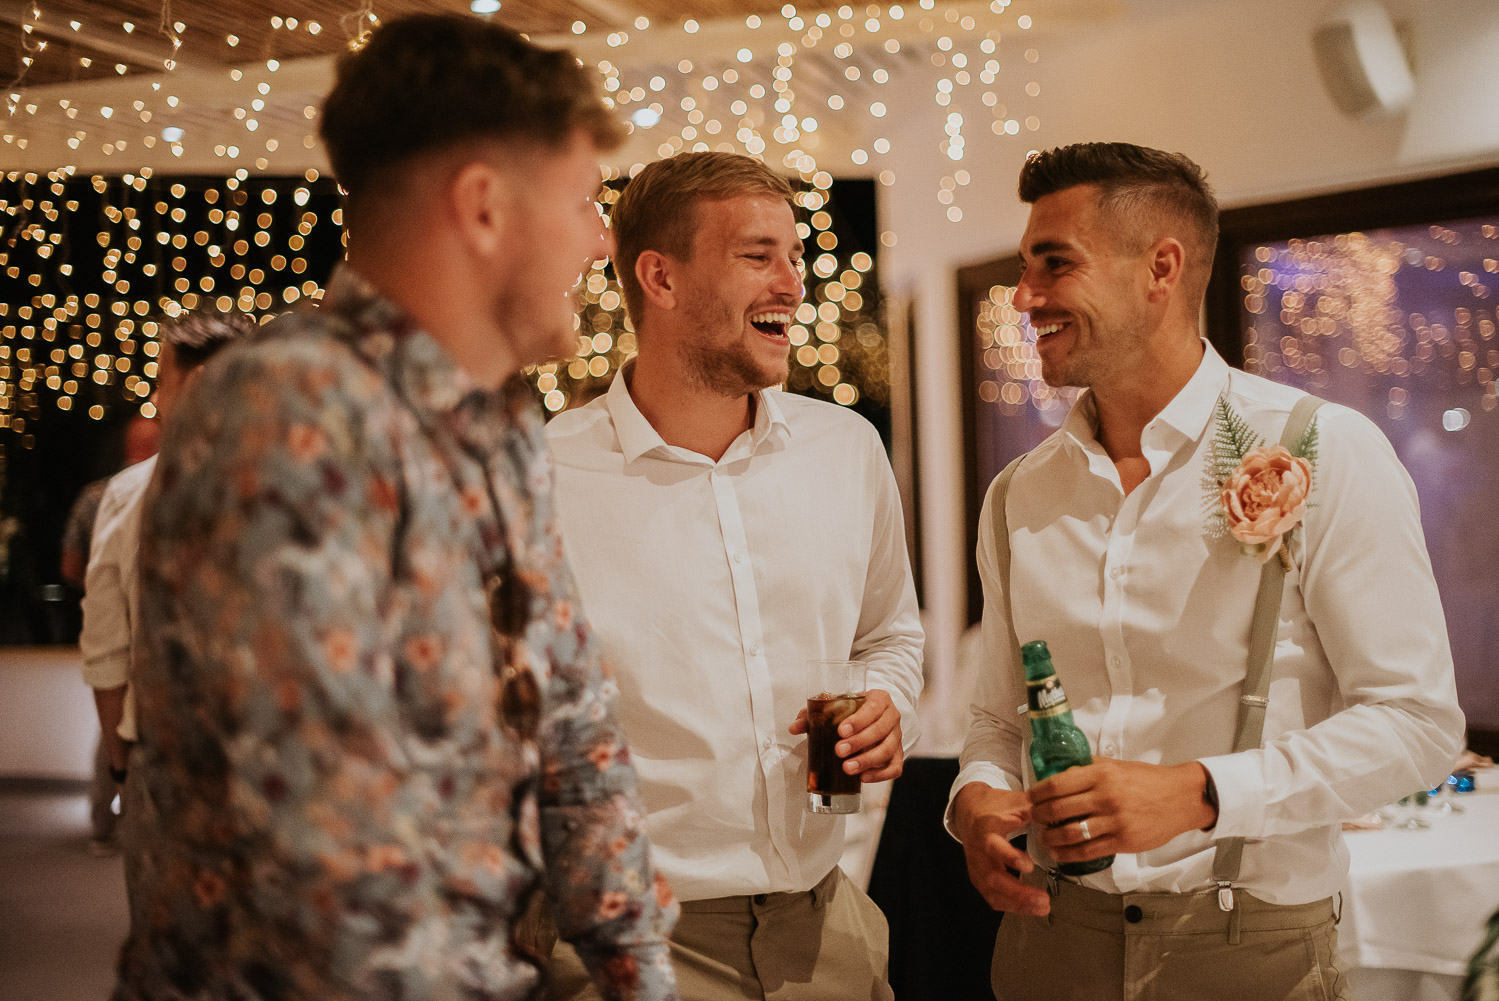 Wedding photographer Santorini: groom and his friends chatting and laughing under the fairy lights by Ben and Vesna.